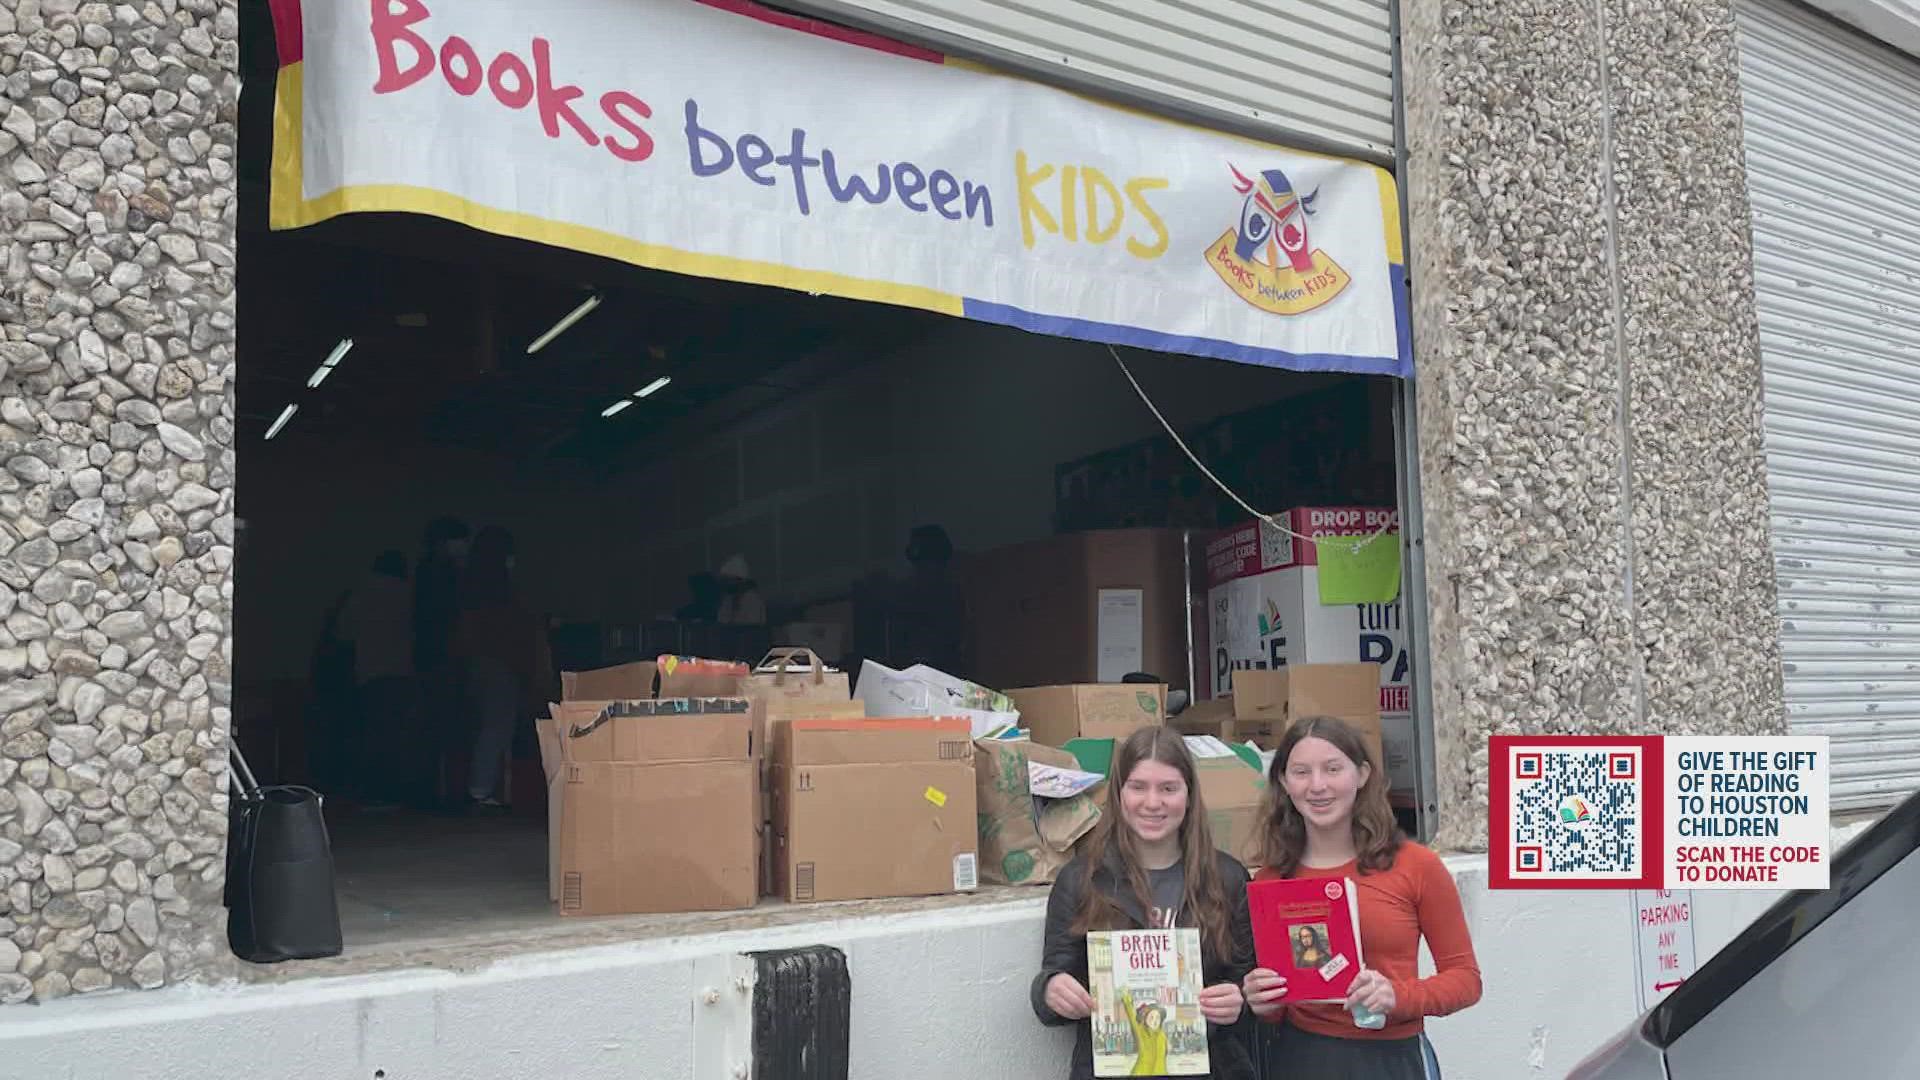 KHOU 11 is working to collect 50,000 new or gently used books to donate to Books Between Kids as part of our ‘Turn the Page’ literacy initiative.